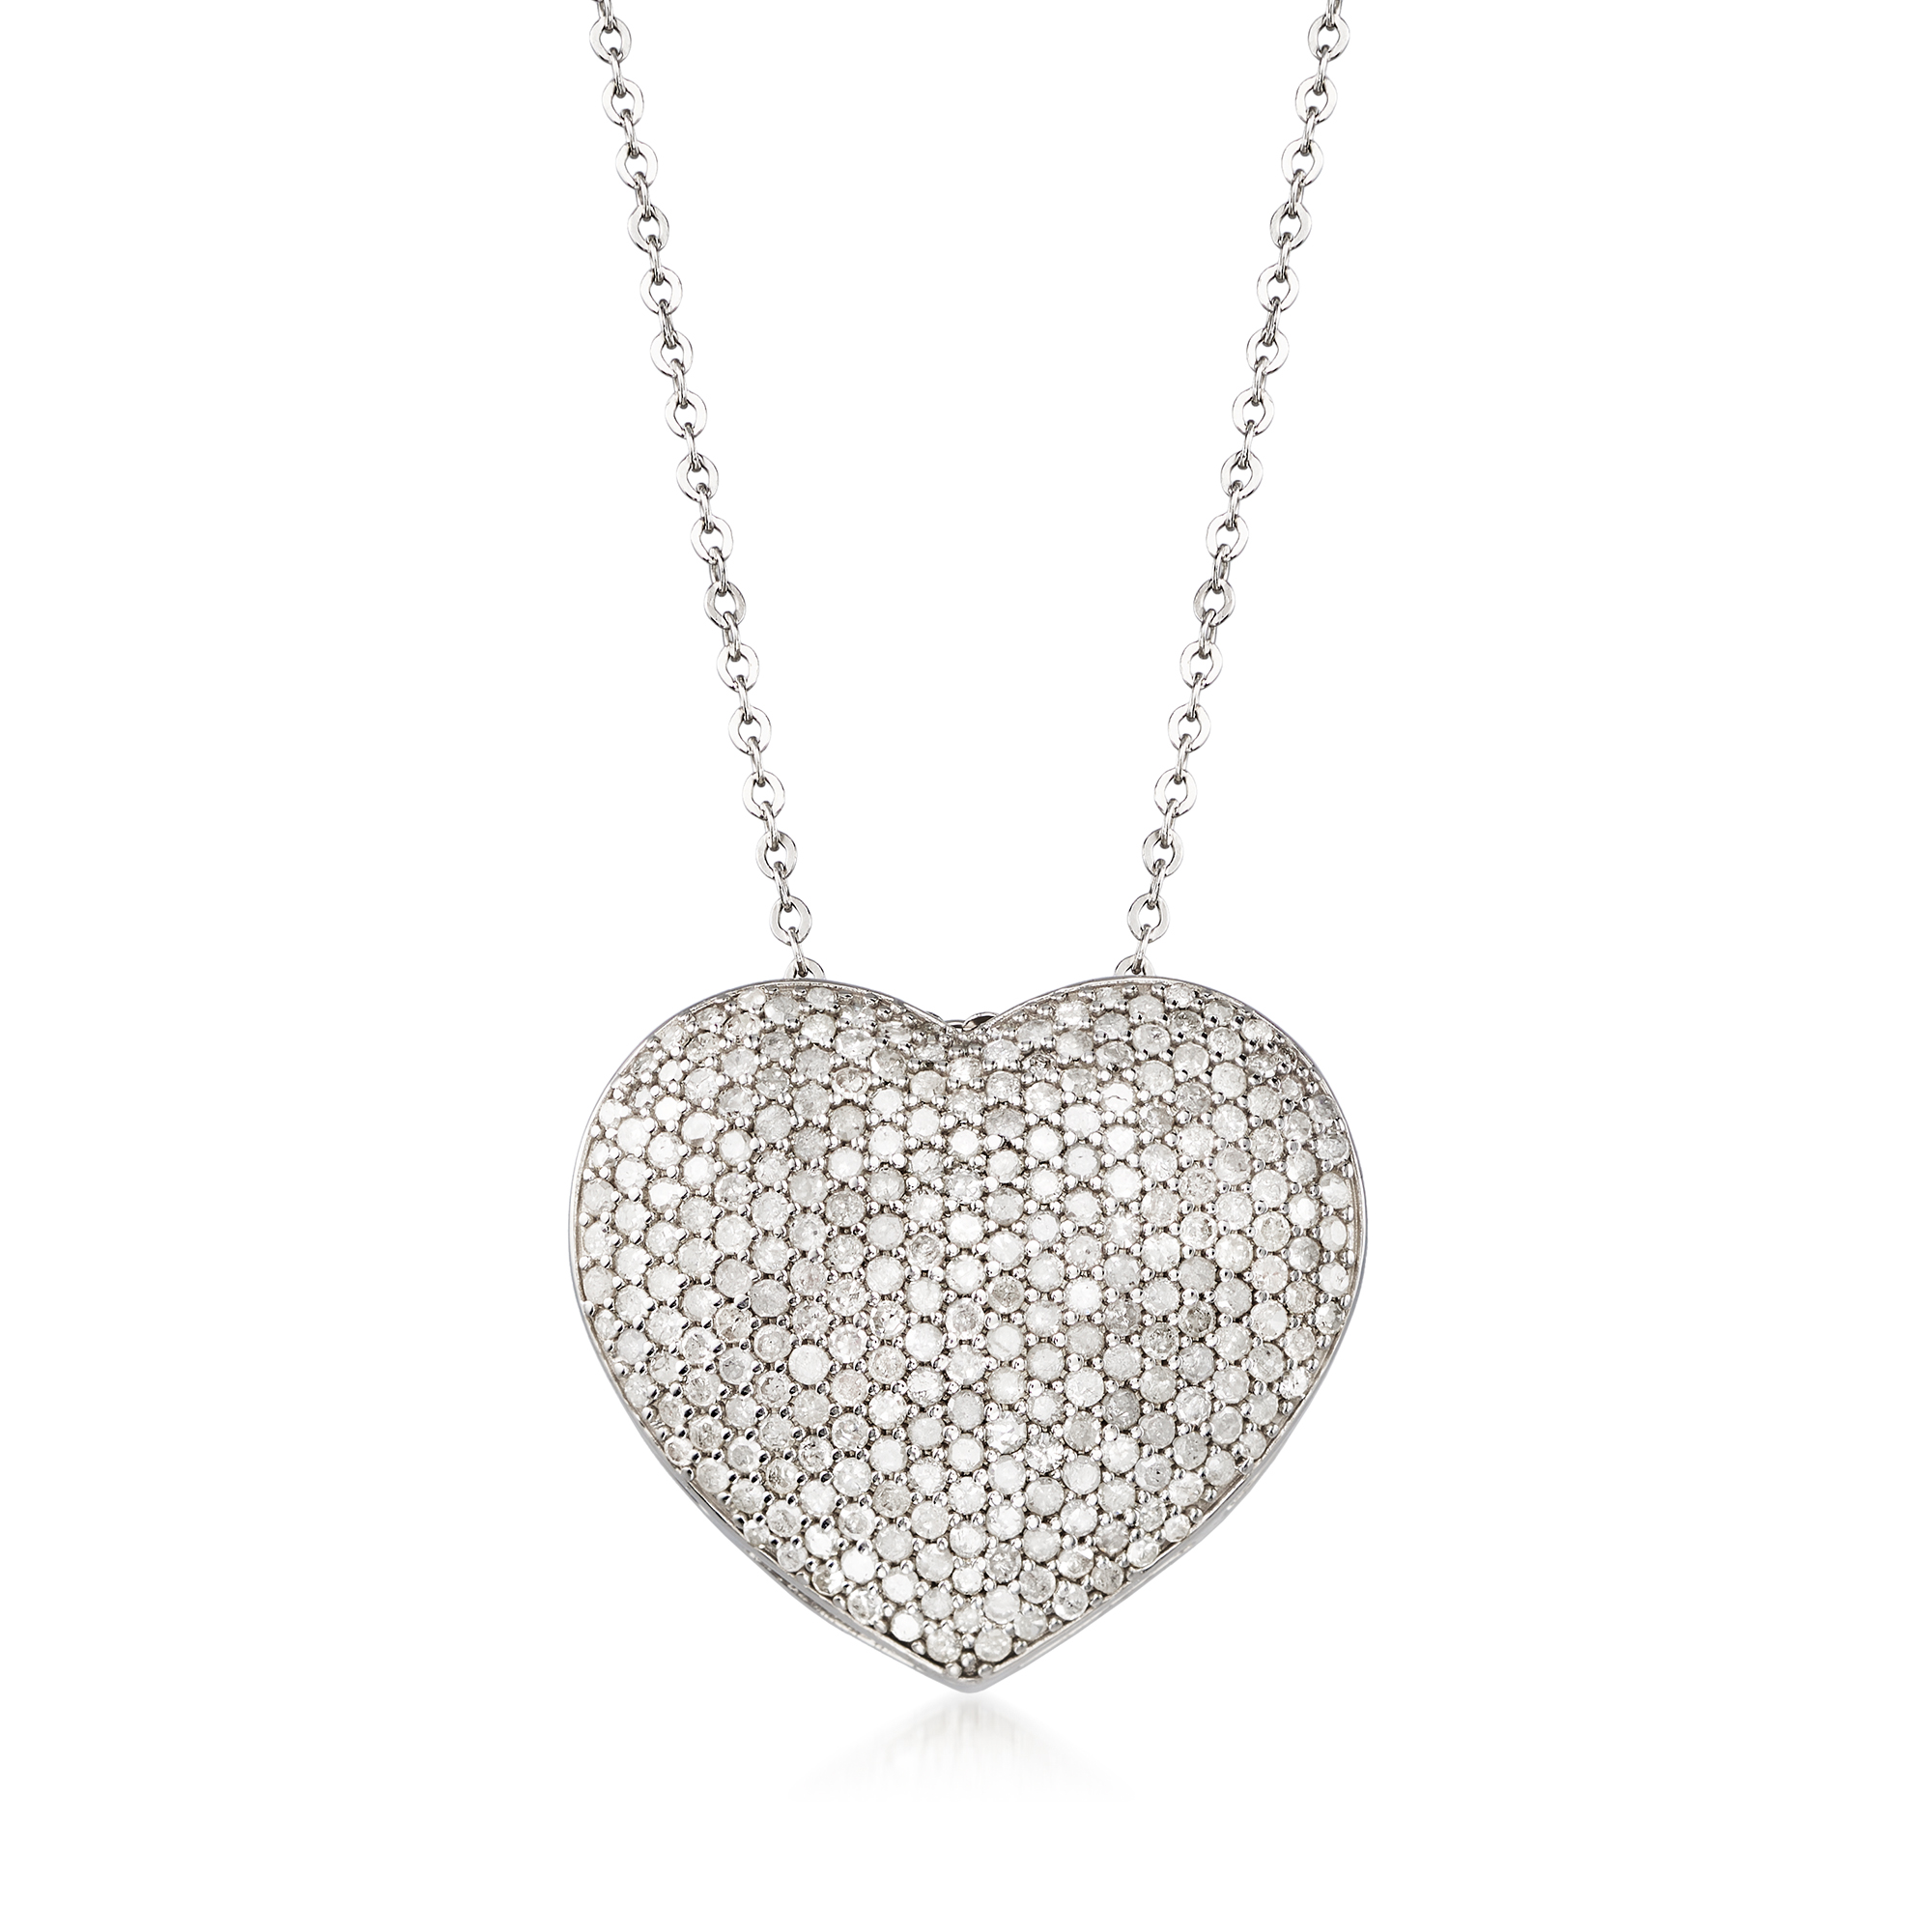 2.00 ct. t.w. Pave Diamond Heart Pendant Necklace in 14kt White 